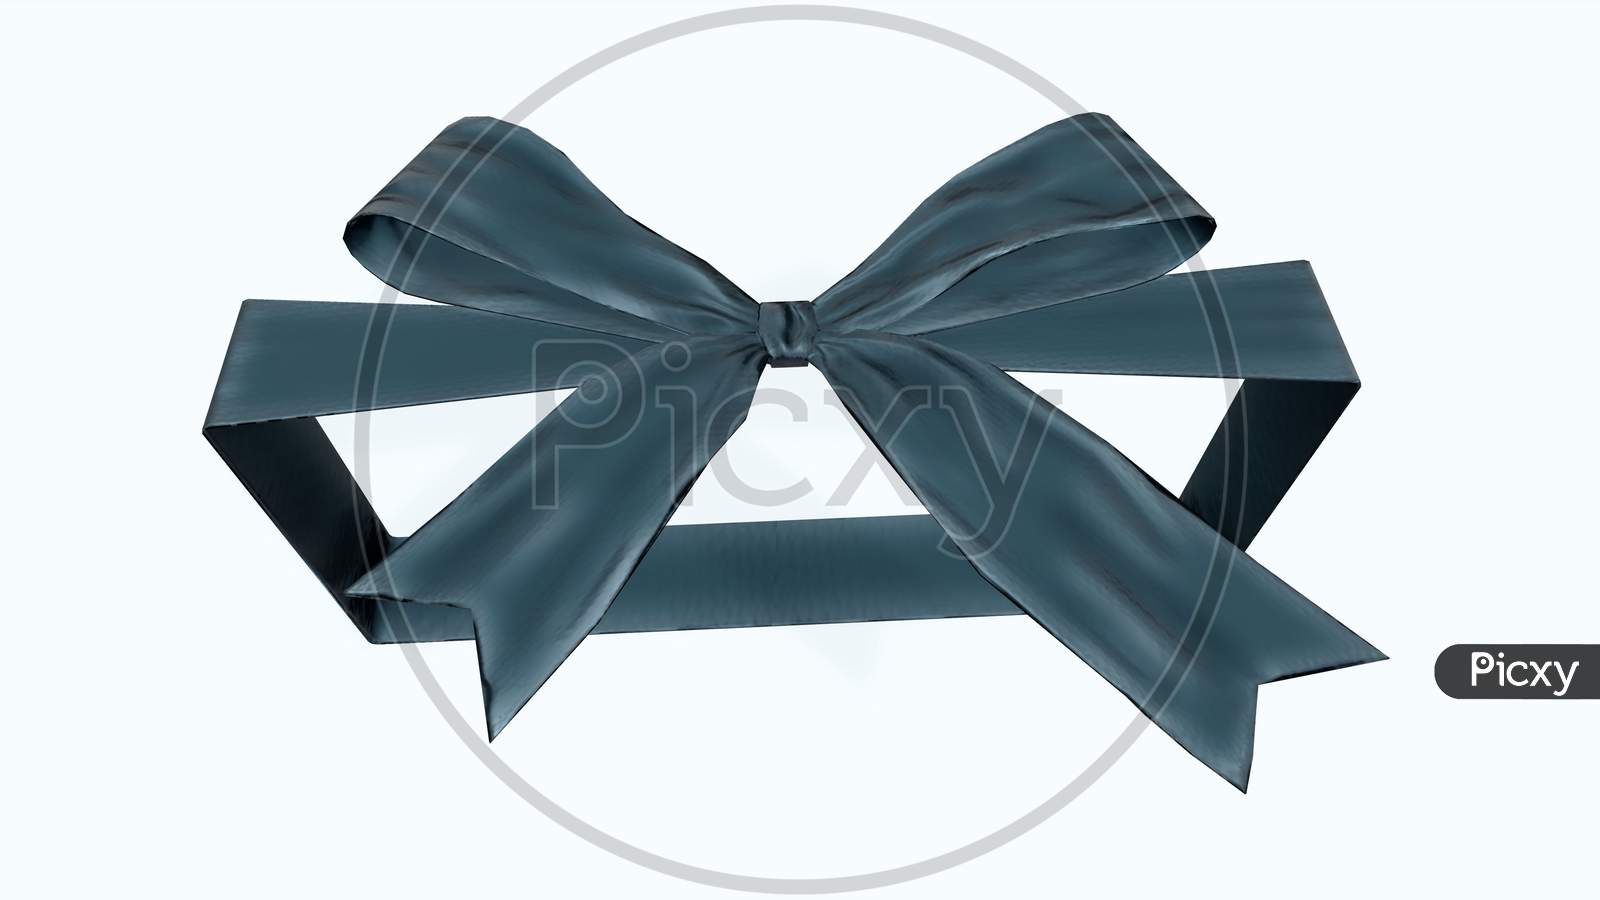 3D Render Black Bow Isolated On White Background